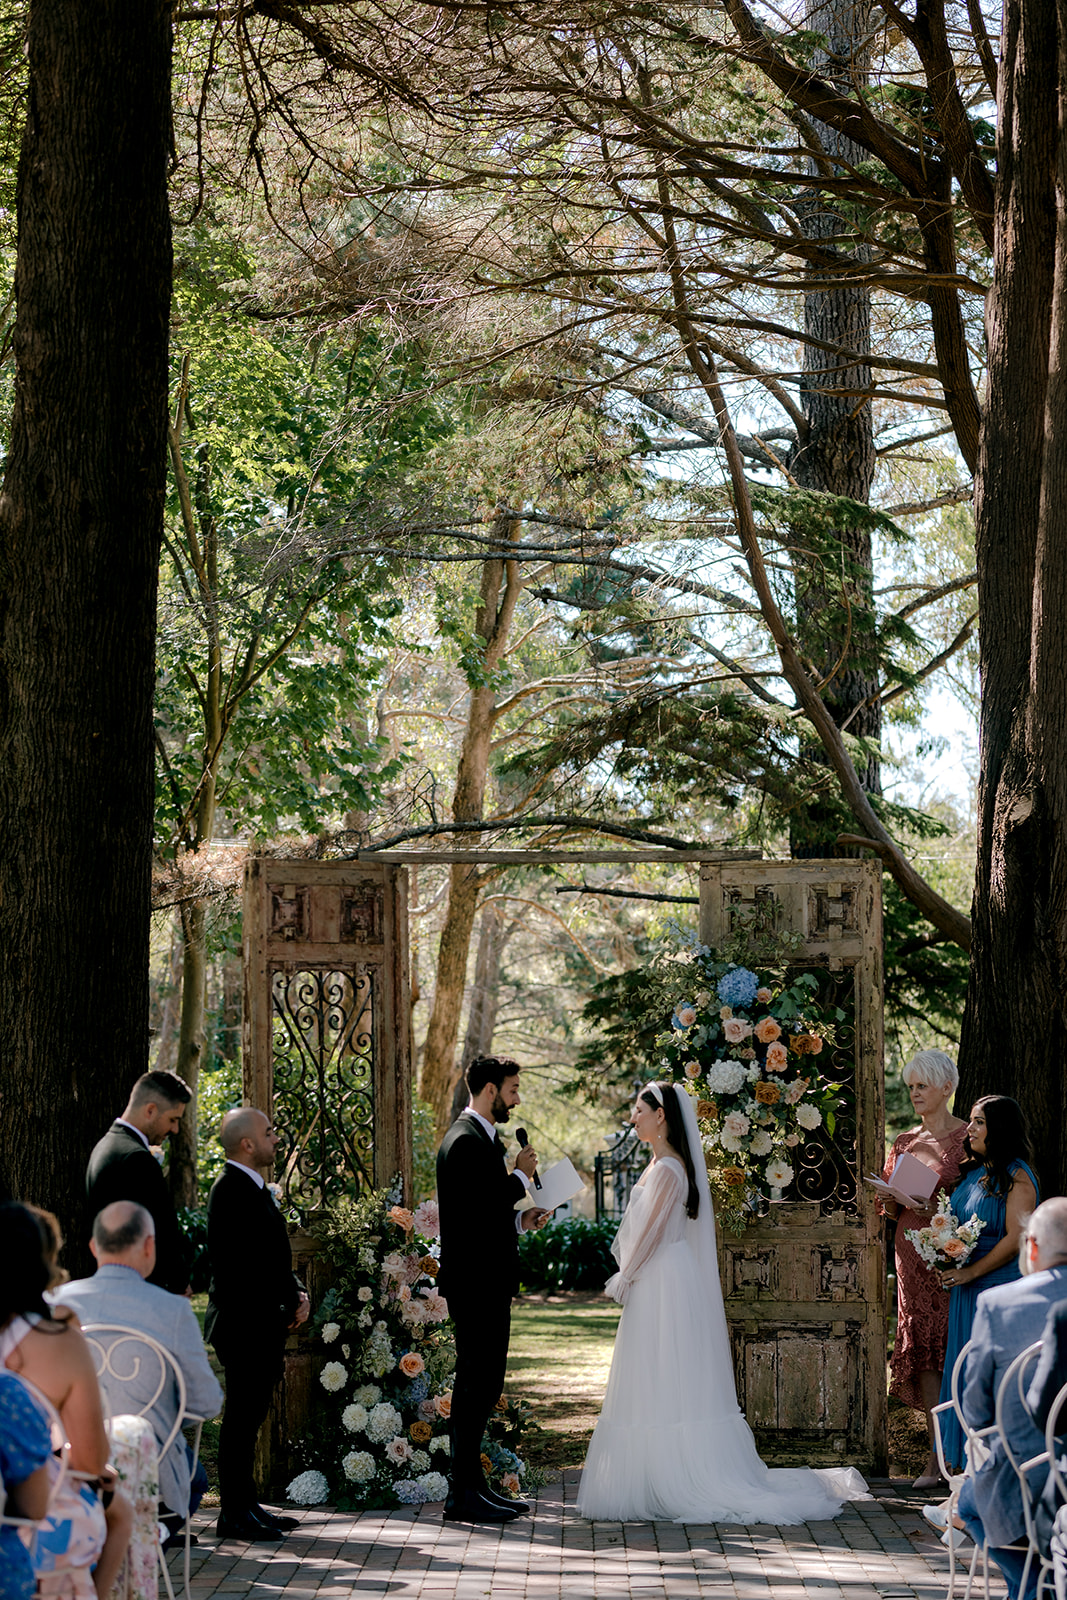 Portrait of bride & groom exchanging vows at their elegant country wedding ceremony.